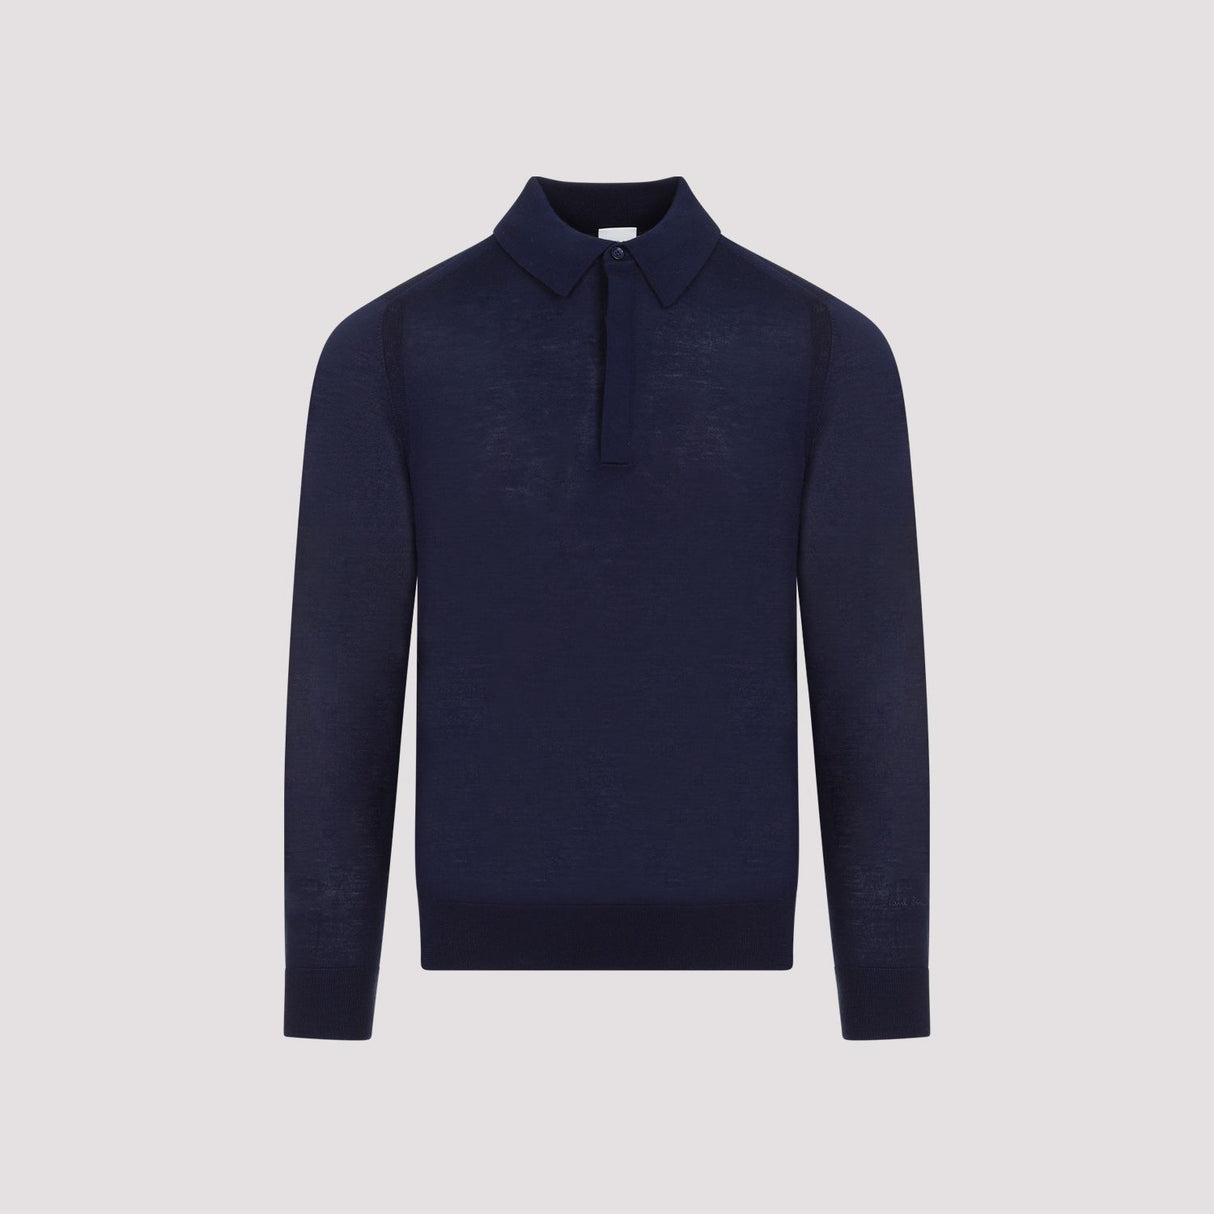 PAUL SMITH Blue Merino Wool Sweater for Men - SS24 Collection